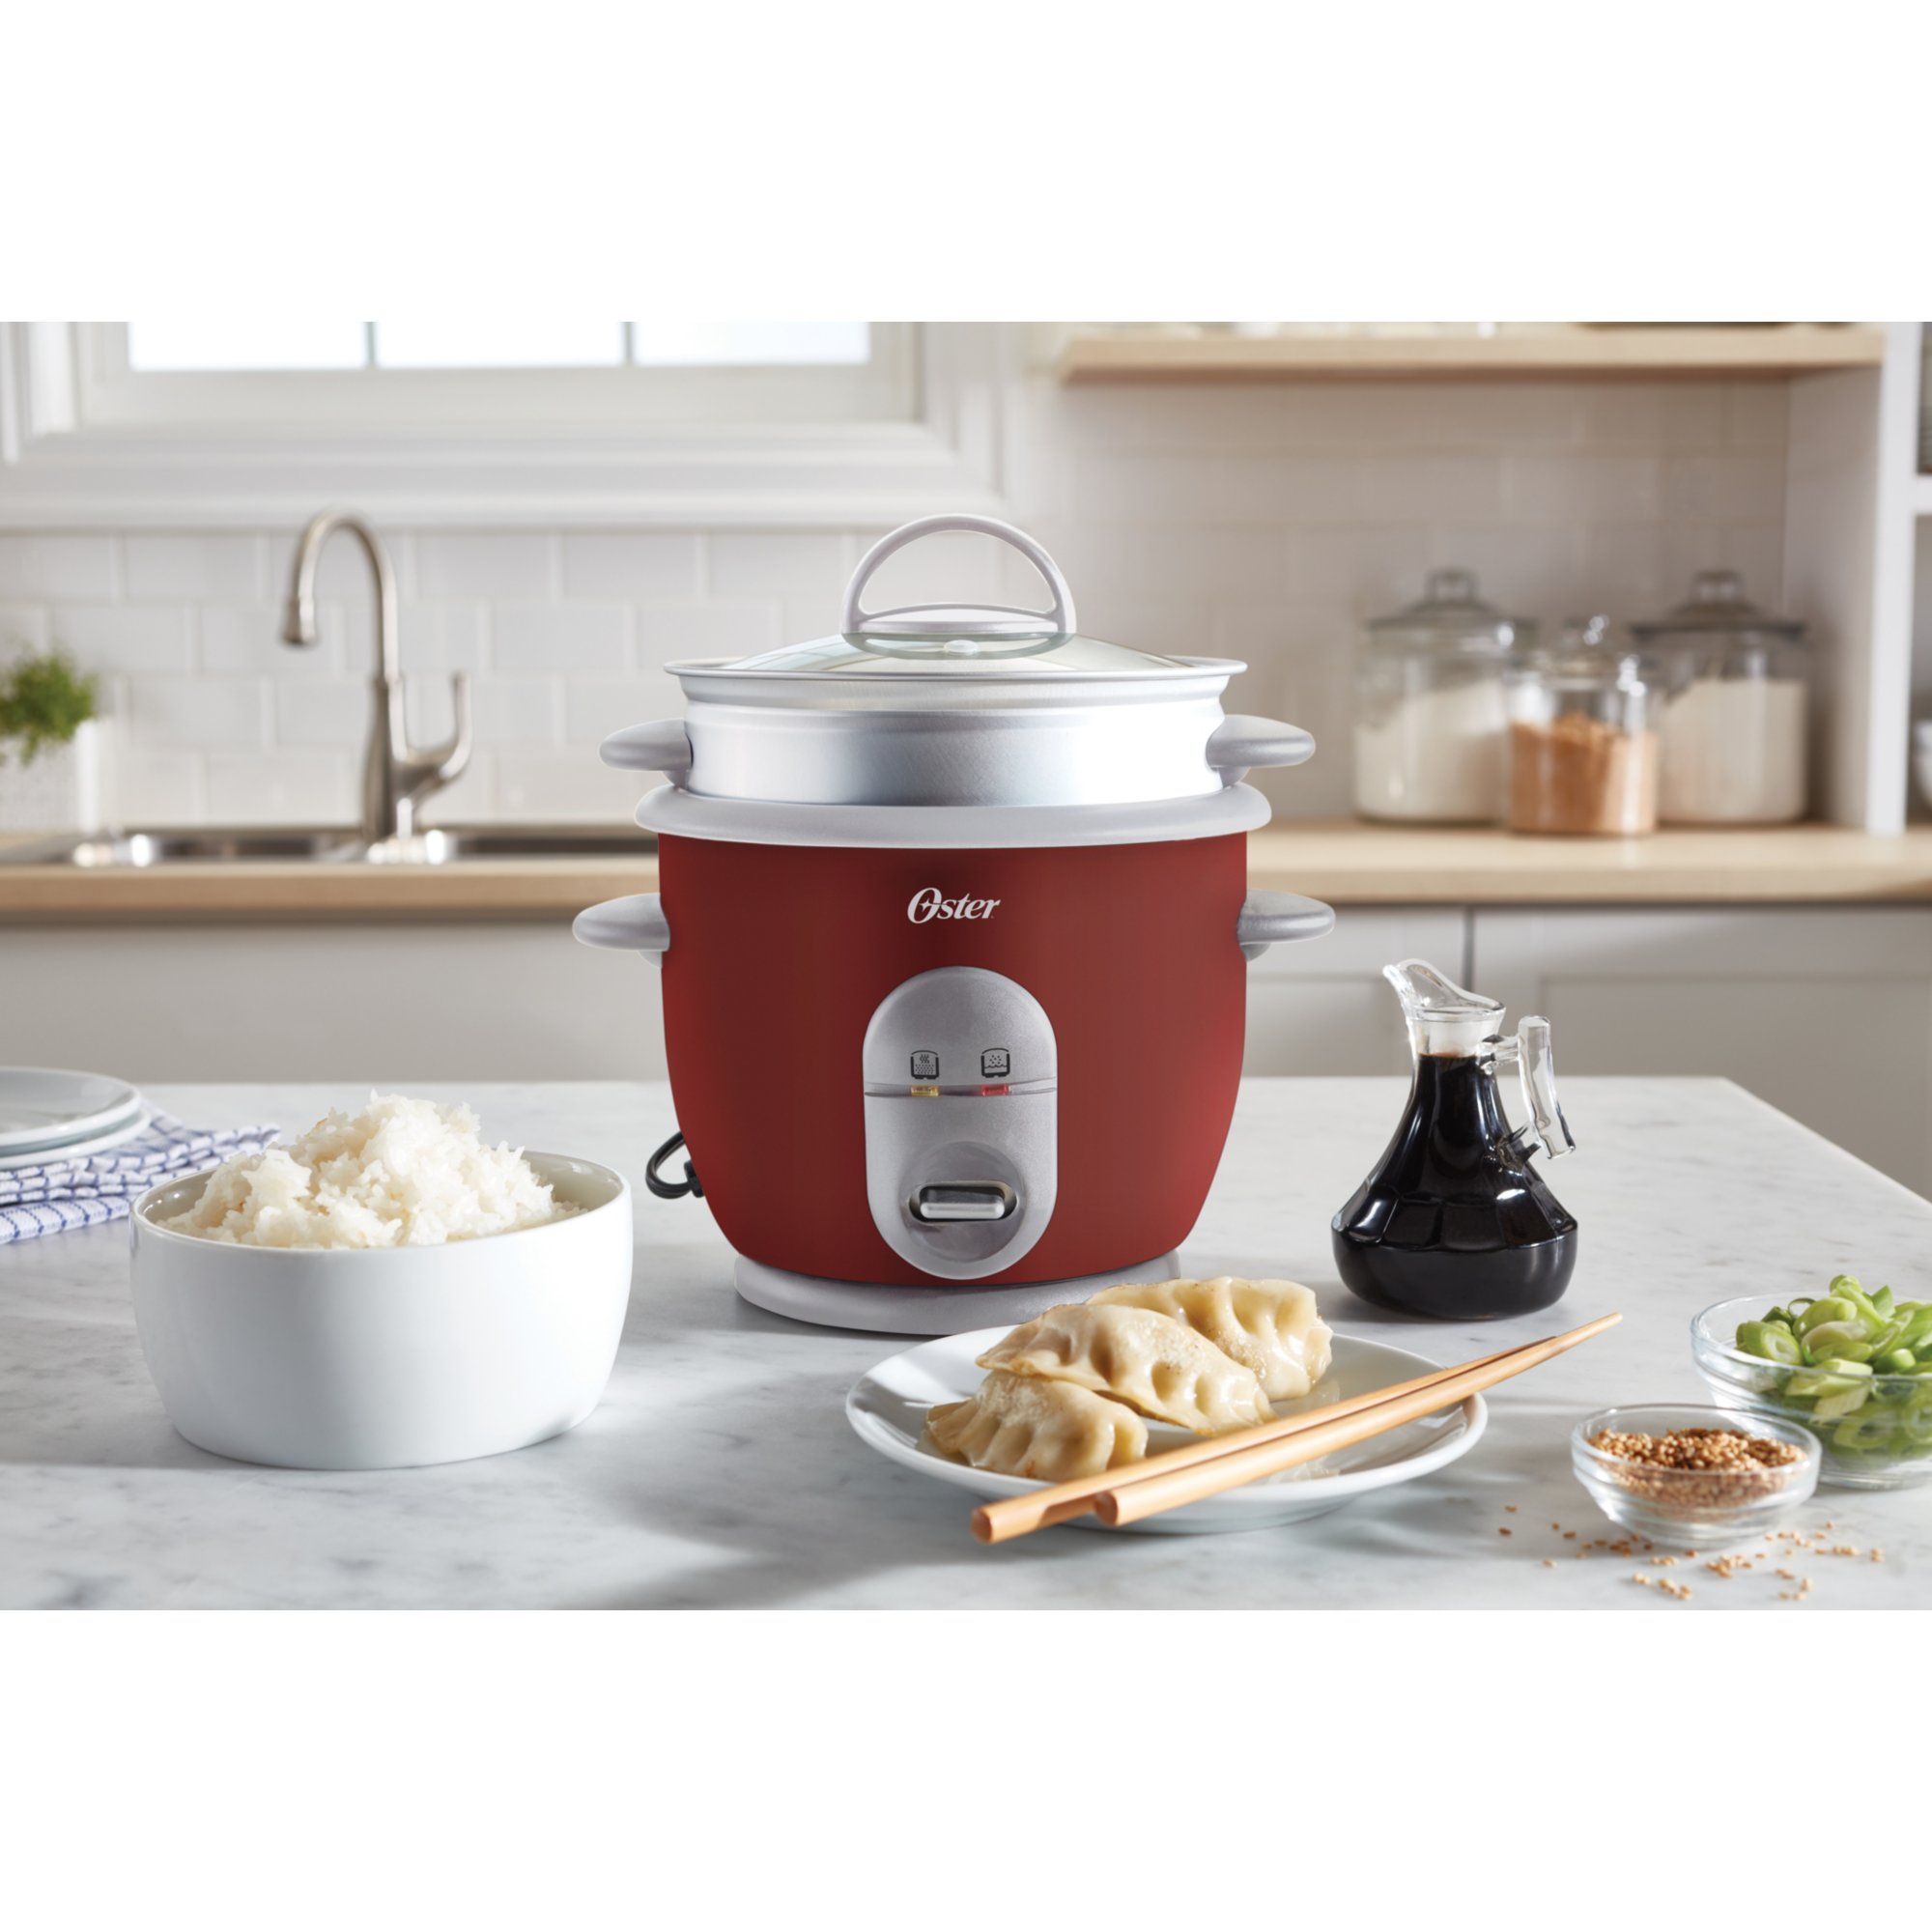 https://s7d9.scene7.com/is/image/NewellRubbermaid/4722000000-oster-rice-cooker-with-steamer-red-straight-on-lifestyle-1?wid=2000&hei=2000